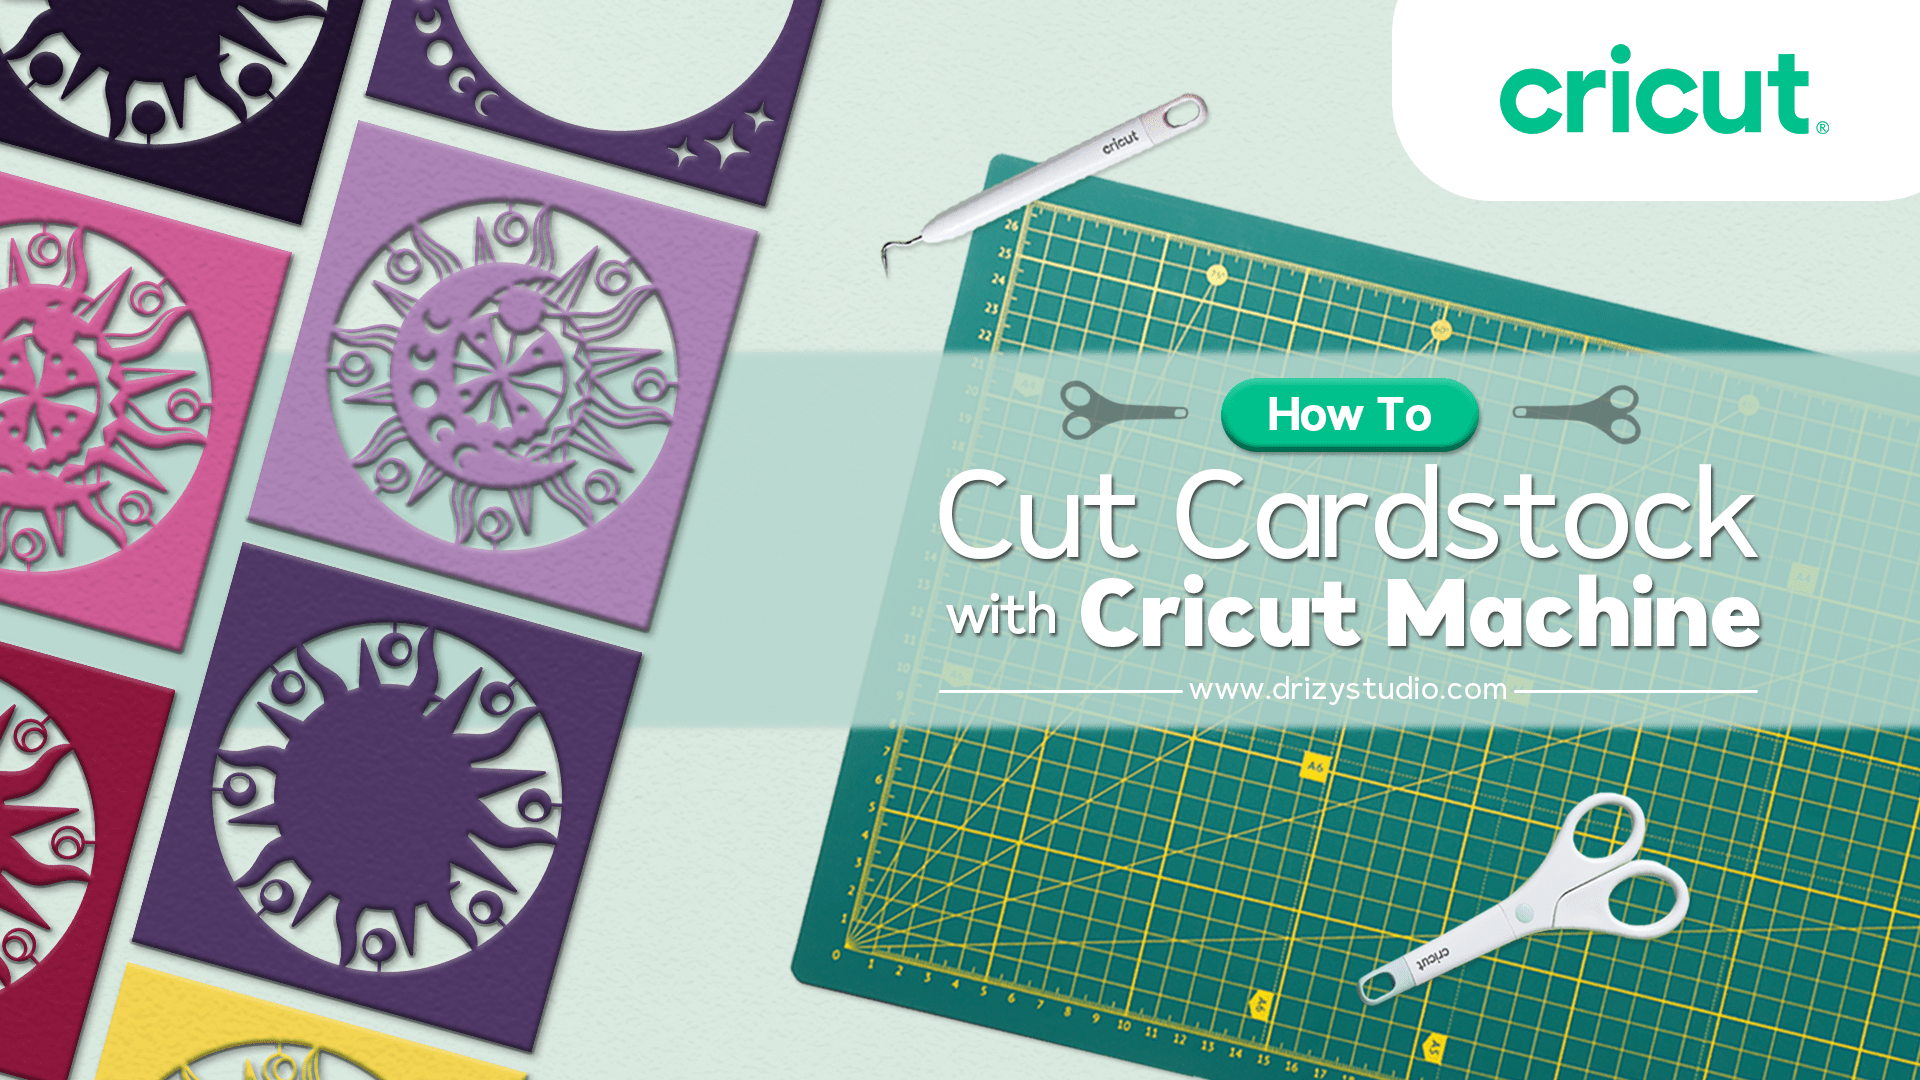 How to Cut Cardstock with Cricut Machine Post Cover